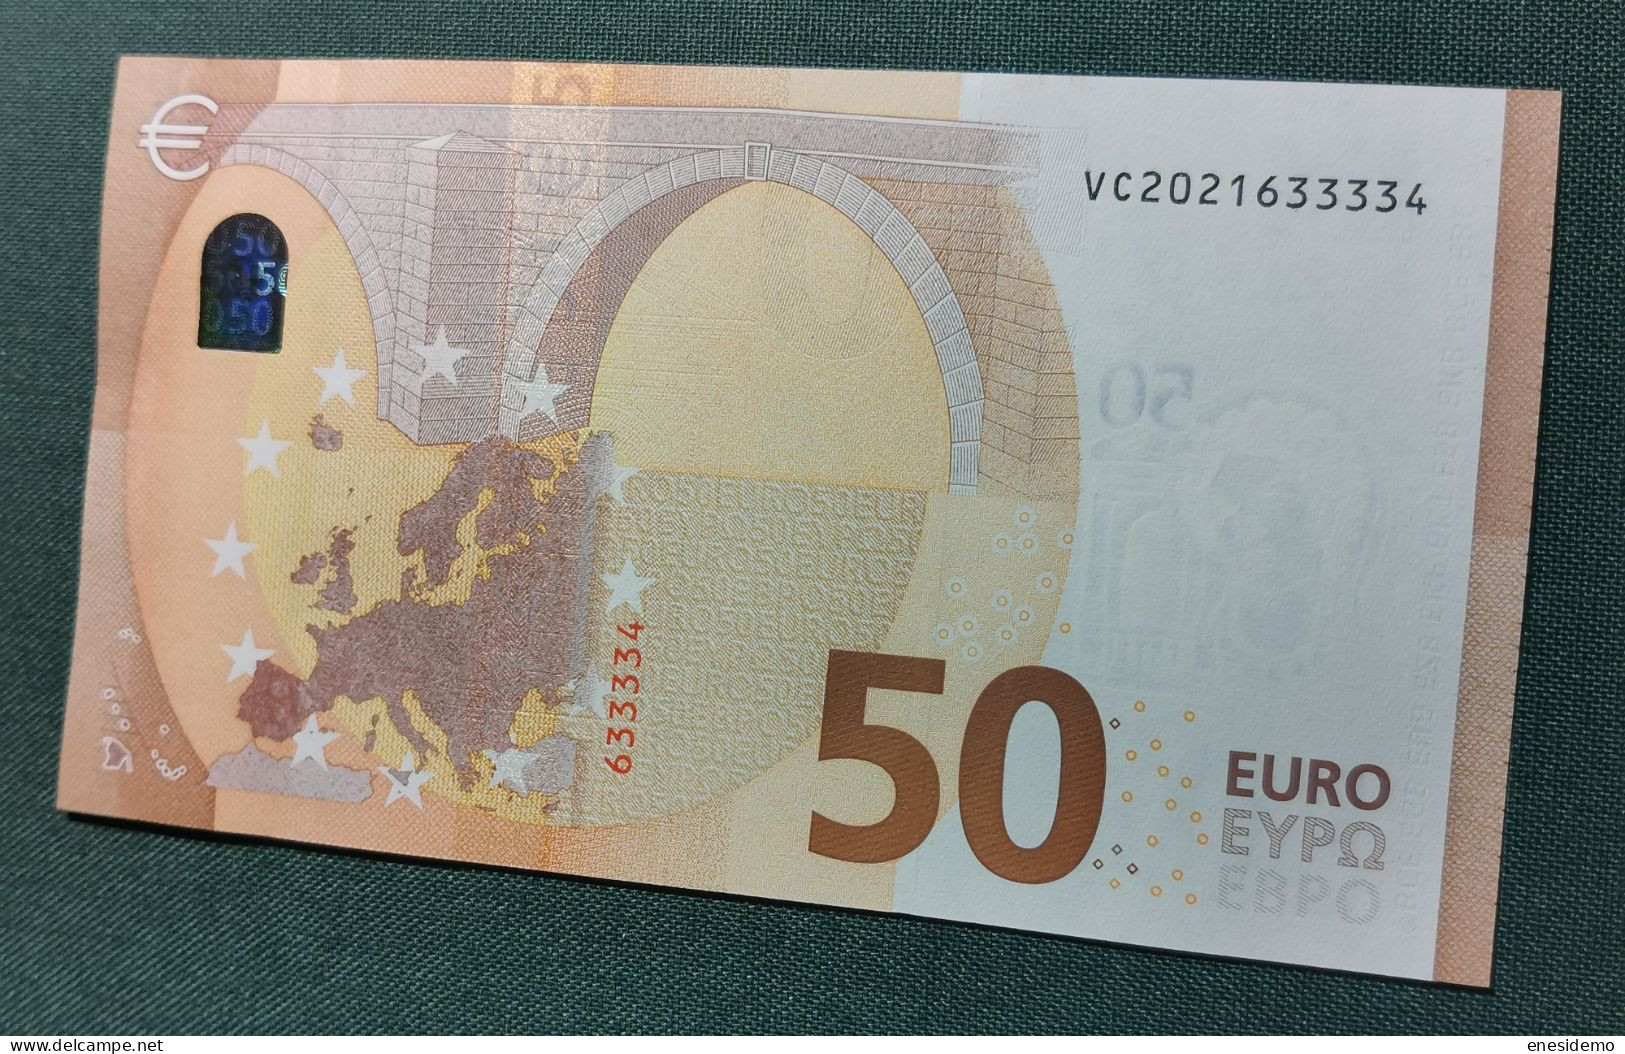 50 EURO SPAIN 2017 LAGARDE V021E4 VC UNC. SC FDS NICE NUMBER